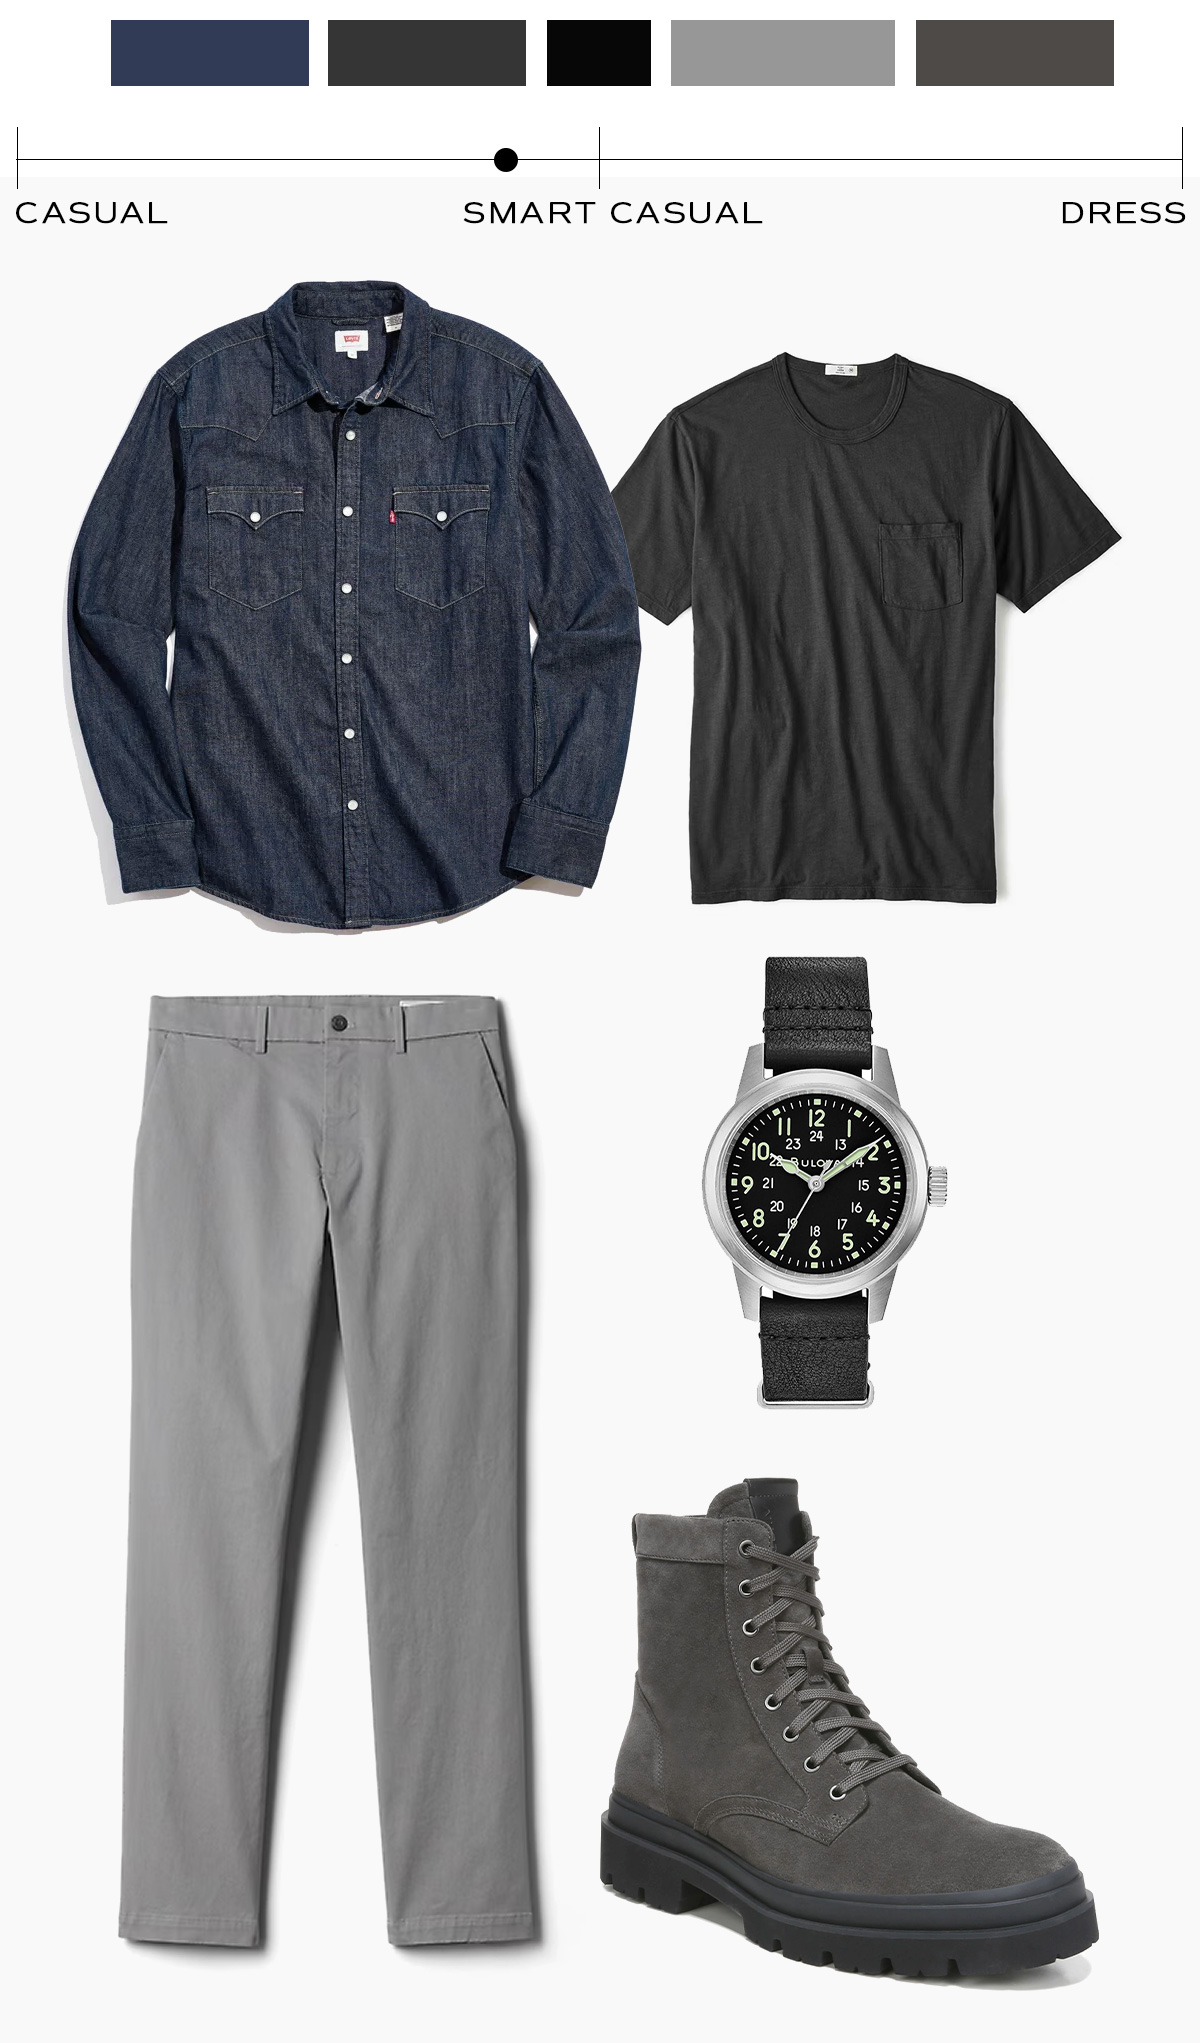 A collage displays a men's outfit with items aligned along a dress code scale from 'Casual' to 'Dress', marked slightly less formal than 'Smart Casual'. The outfit includes a denim button-up shirt with white buttons and two chest pockets with a red logo tag on the left pocket, paired with light grey trousers. Adjacent to these, a dark grey t-shirt, a black leather-strapped watch featuring a white face with both standard and military time indications, and grey suede lace-up boots are shown. Above, color swatches in various shades of blue and grey match the outfit items.